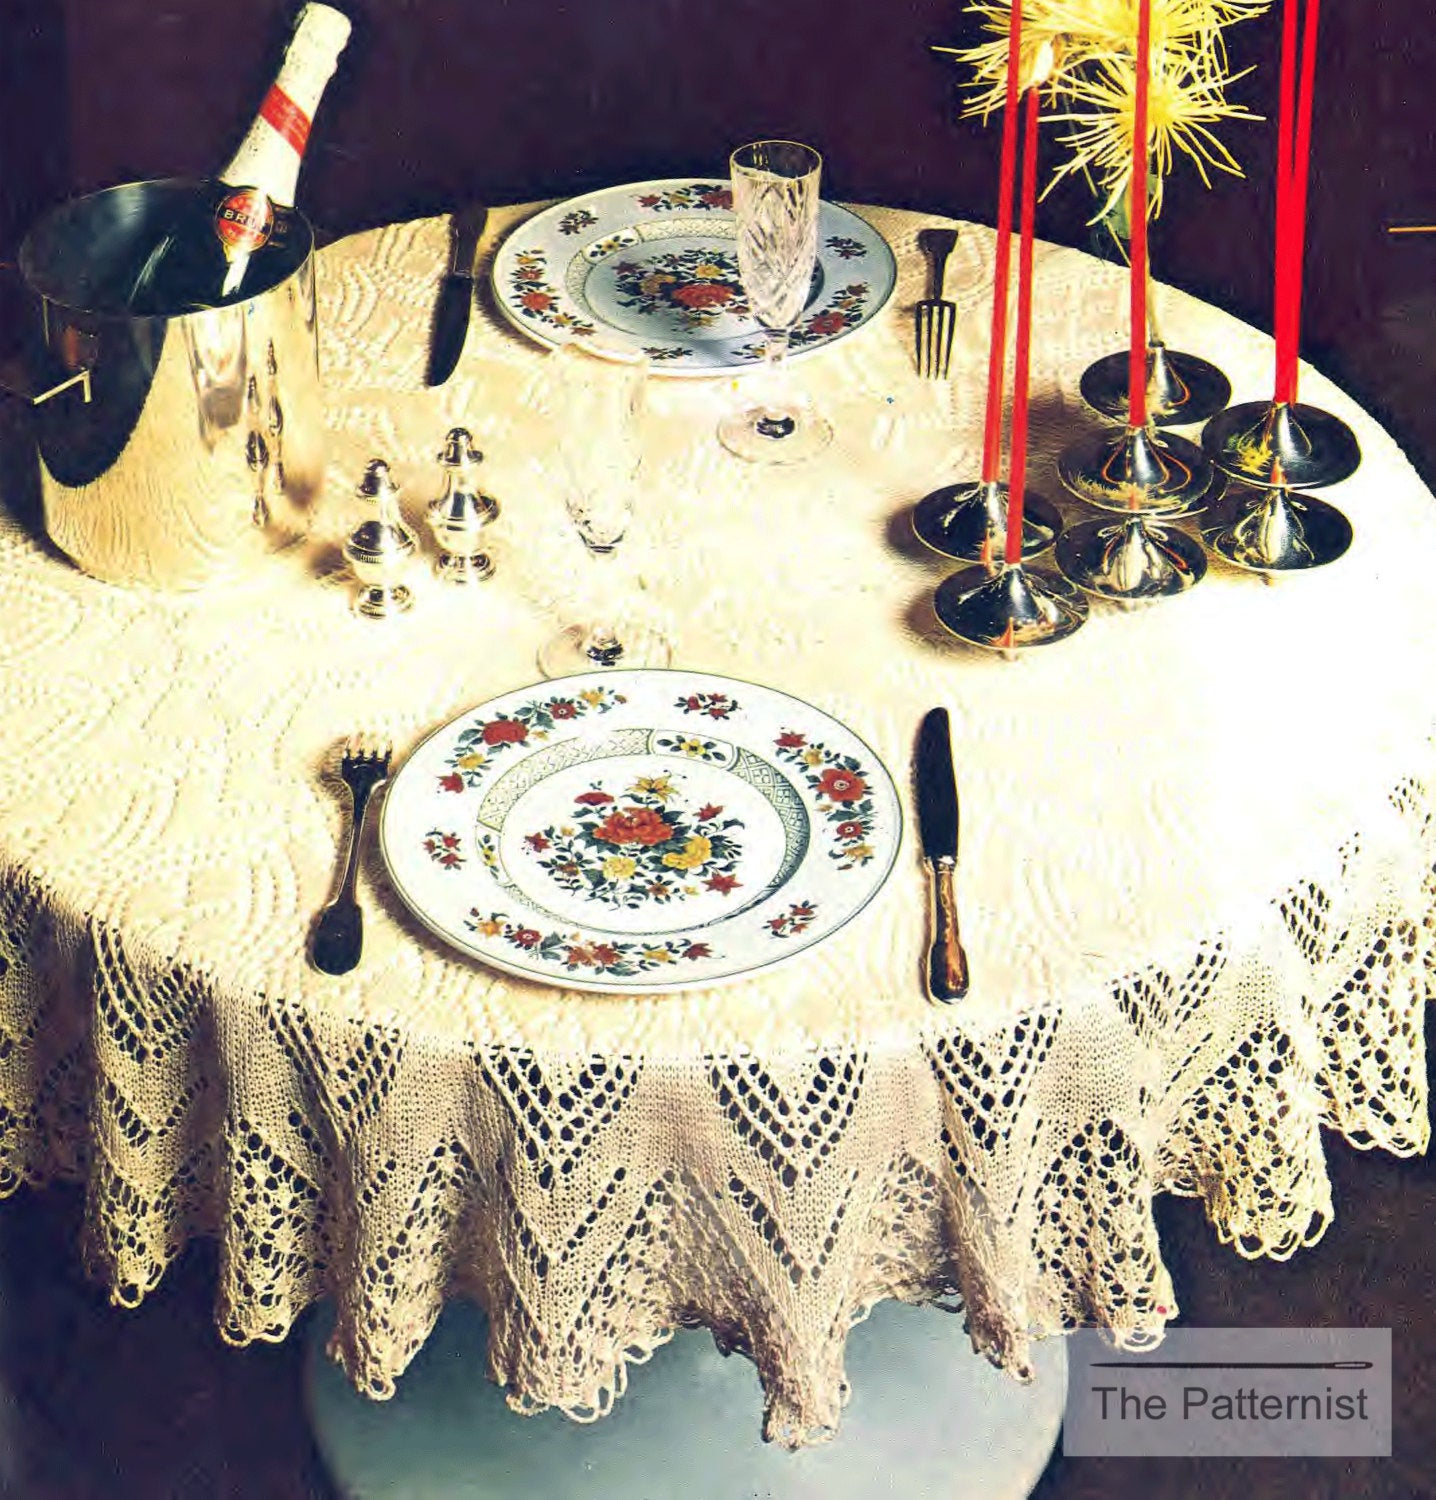 Knitting Patterns For Tablecloths Circular Tablecloth Knitting Pattern Vintage Round 52 Inch Diameter Row Row Pdf Instant Download Sku 49 9